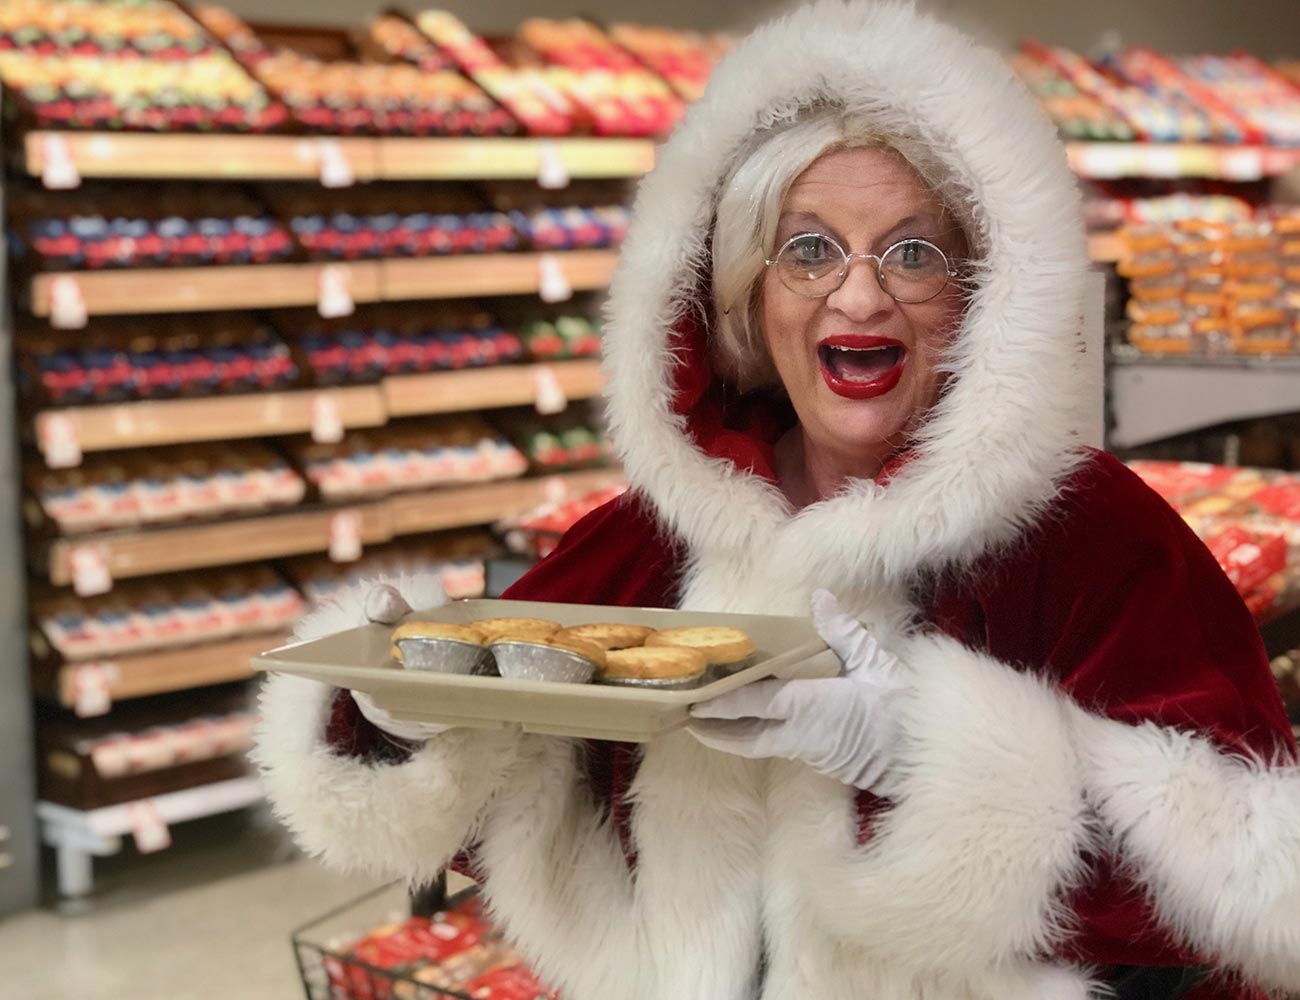 Mrs Claus with Coles Fruit Mince Pies